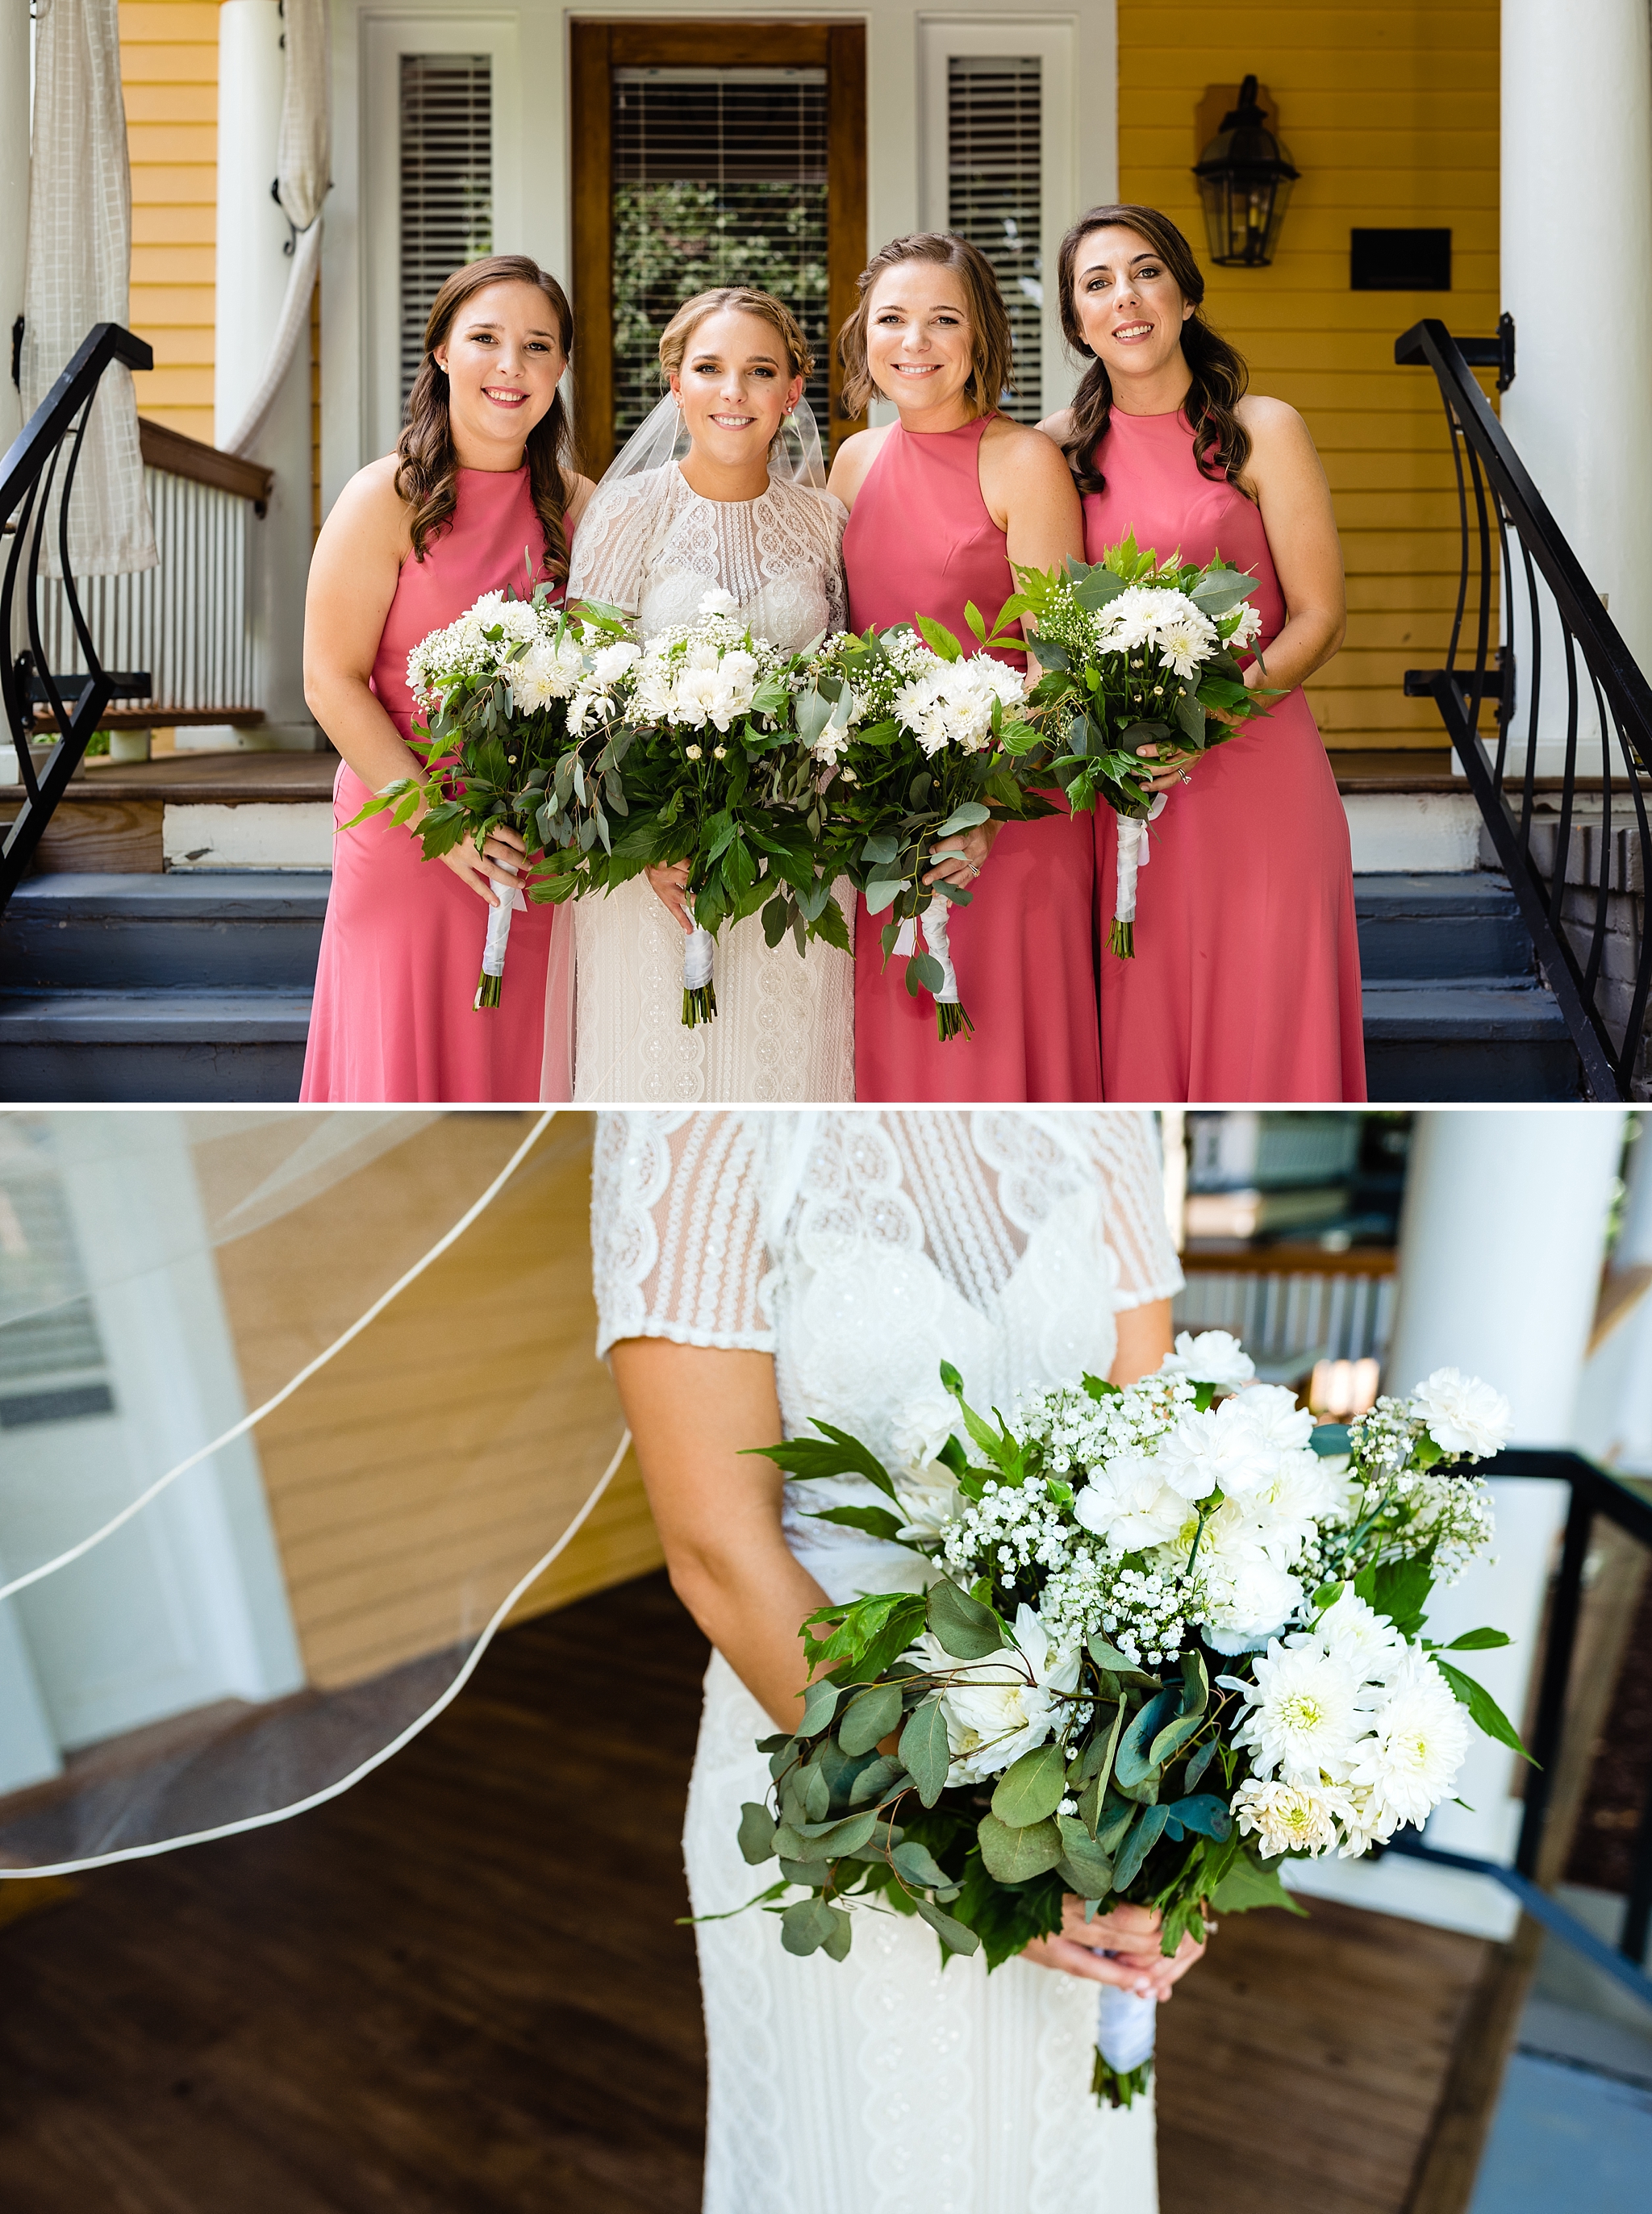 A bride and her bridesmaids, in pink dresses, pose for portraits before the wedding in the Historic Oakwood neighborhood of Raleigh, NC